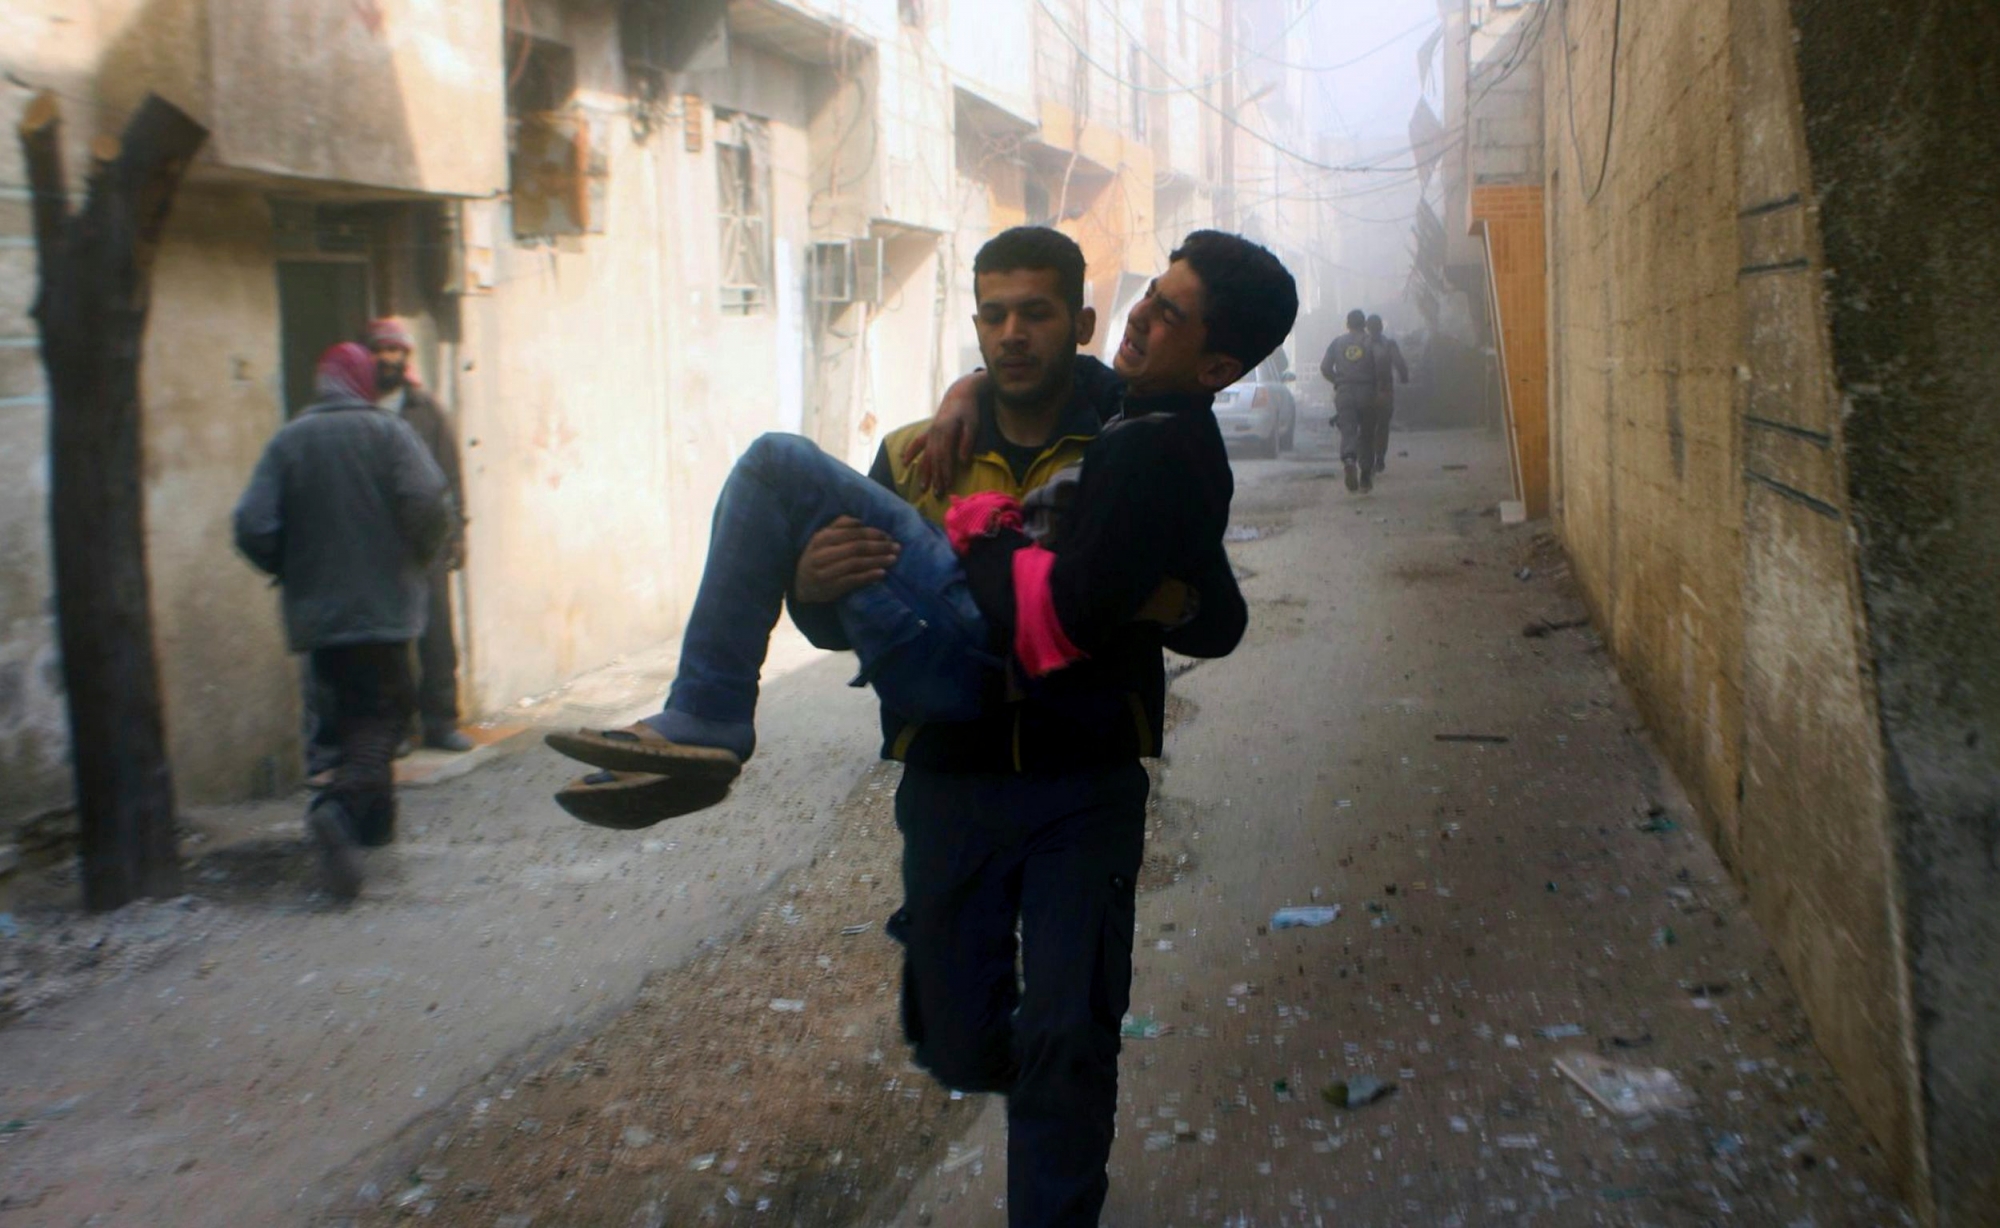 This photo released on Saturday, Feb 24, 2018 by the Syrian Civil Defense group known as the White Helmets, shows members of the Syrian Civil Defense group carrying a young man who was wounded during airstrikes and shelling by Syrian government forces, in Ghouta, a suburb of Damascus, Syria. A new wave of airstrikes and shelling on eastern suburbs of the Syrian capital Damascus left at least 22 people dead and more than a dozen wounded Saturday, raising the death toll of a week of bombing in the area to nearly 500, including scores of women and children. (Syrian Civil Defense White Helmets via AP) Syria